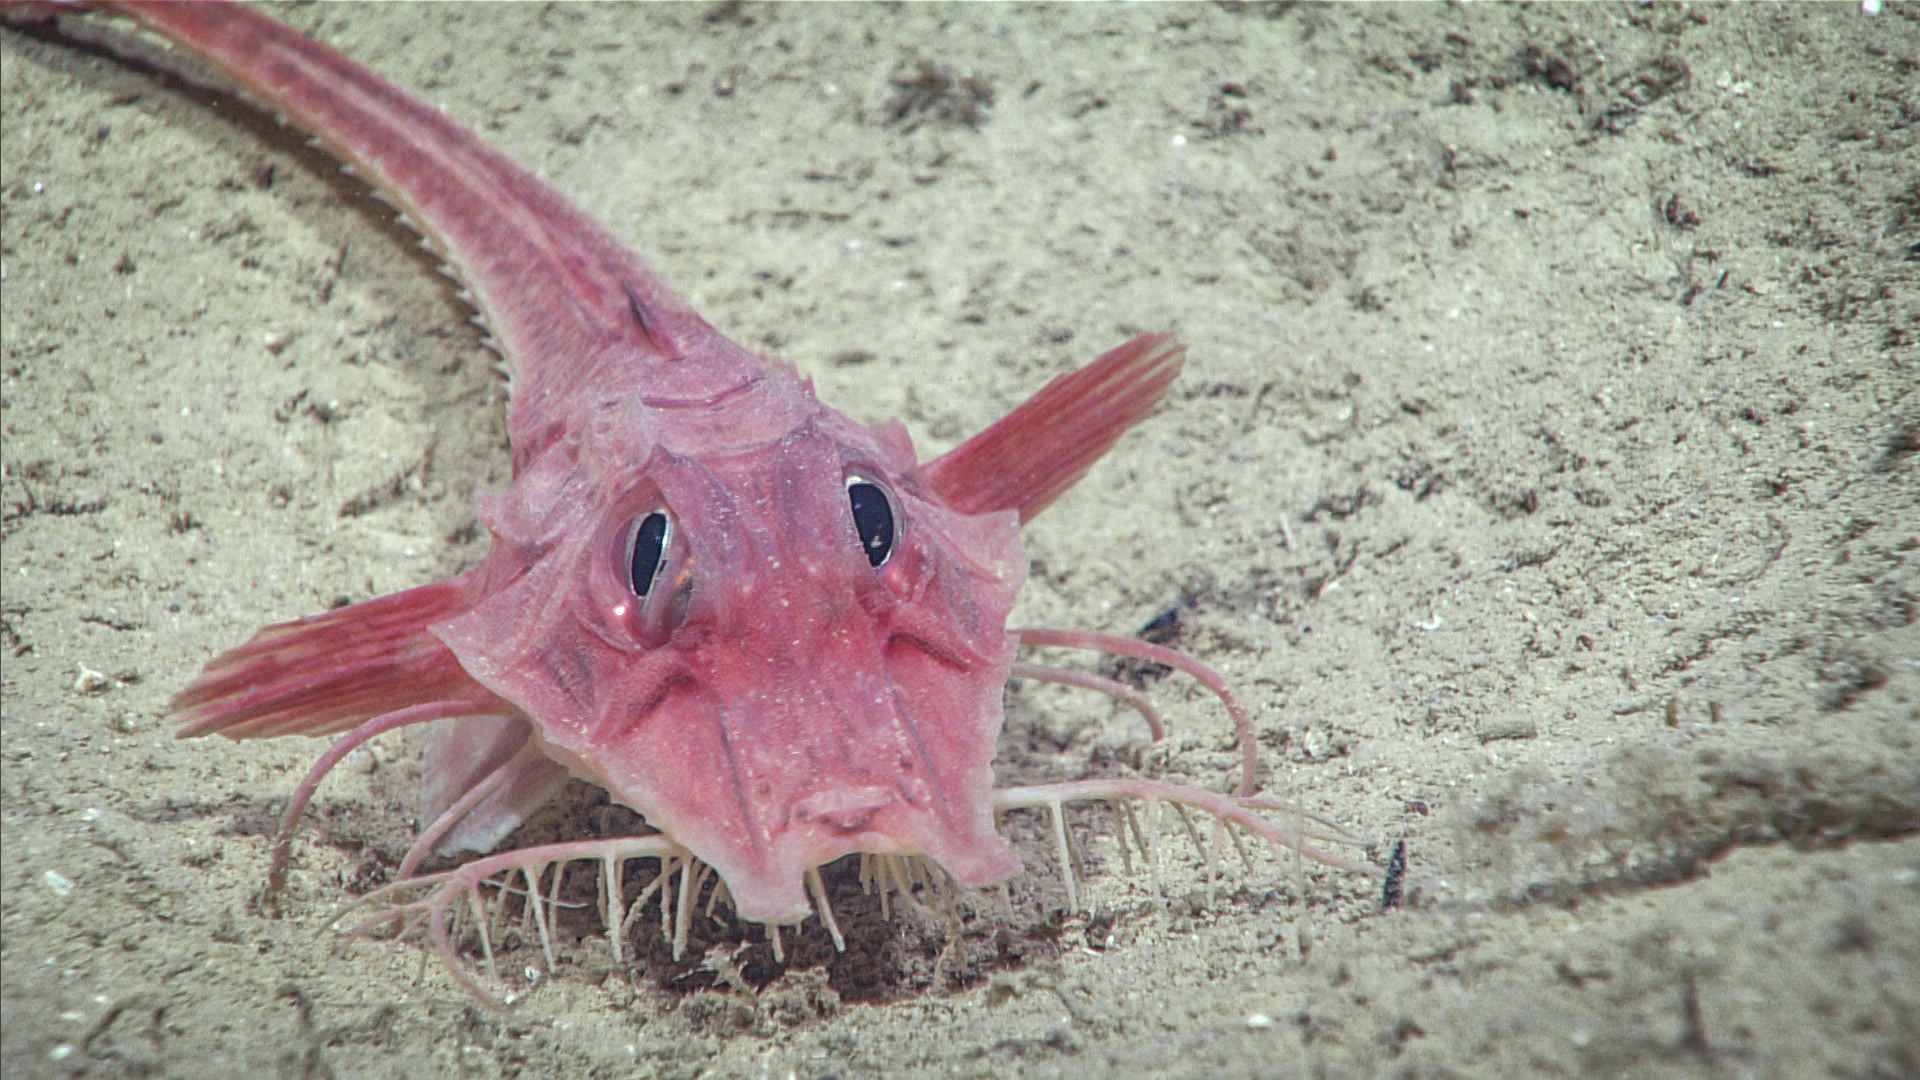 This armored searobin was seen moving across the seafloor during exploration of an area south of the Florida Keys in the Straits of Florida.